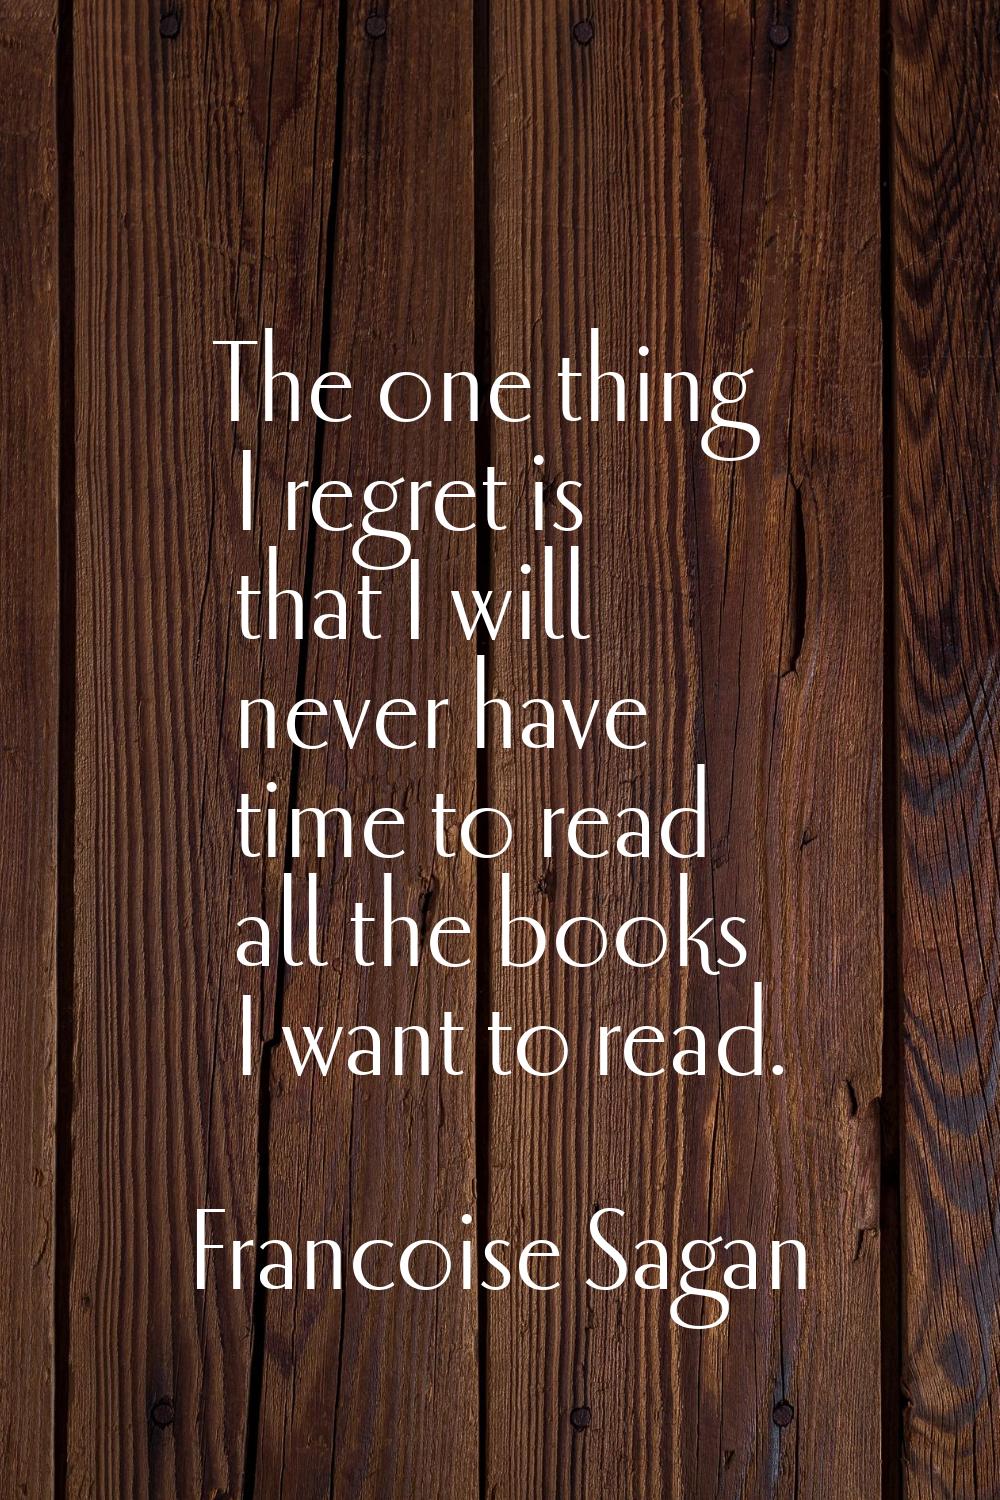 The one thing I regret is that I will never have time to read all the books I want to read.